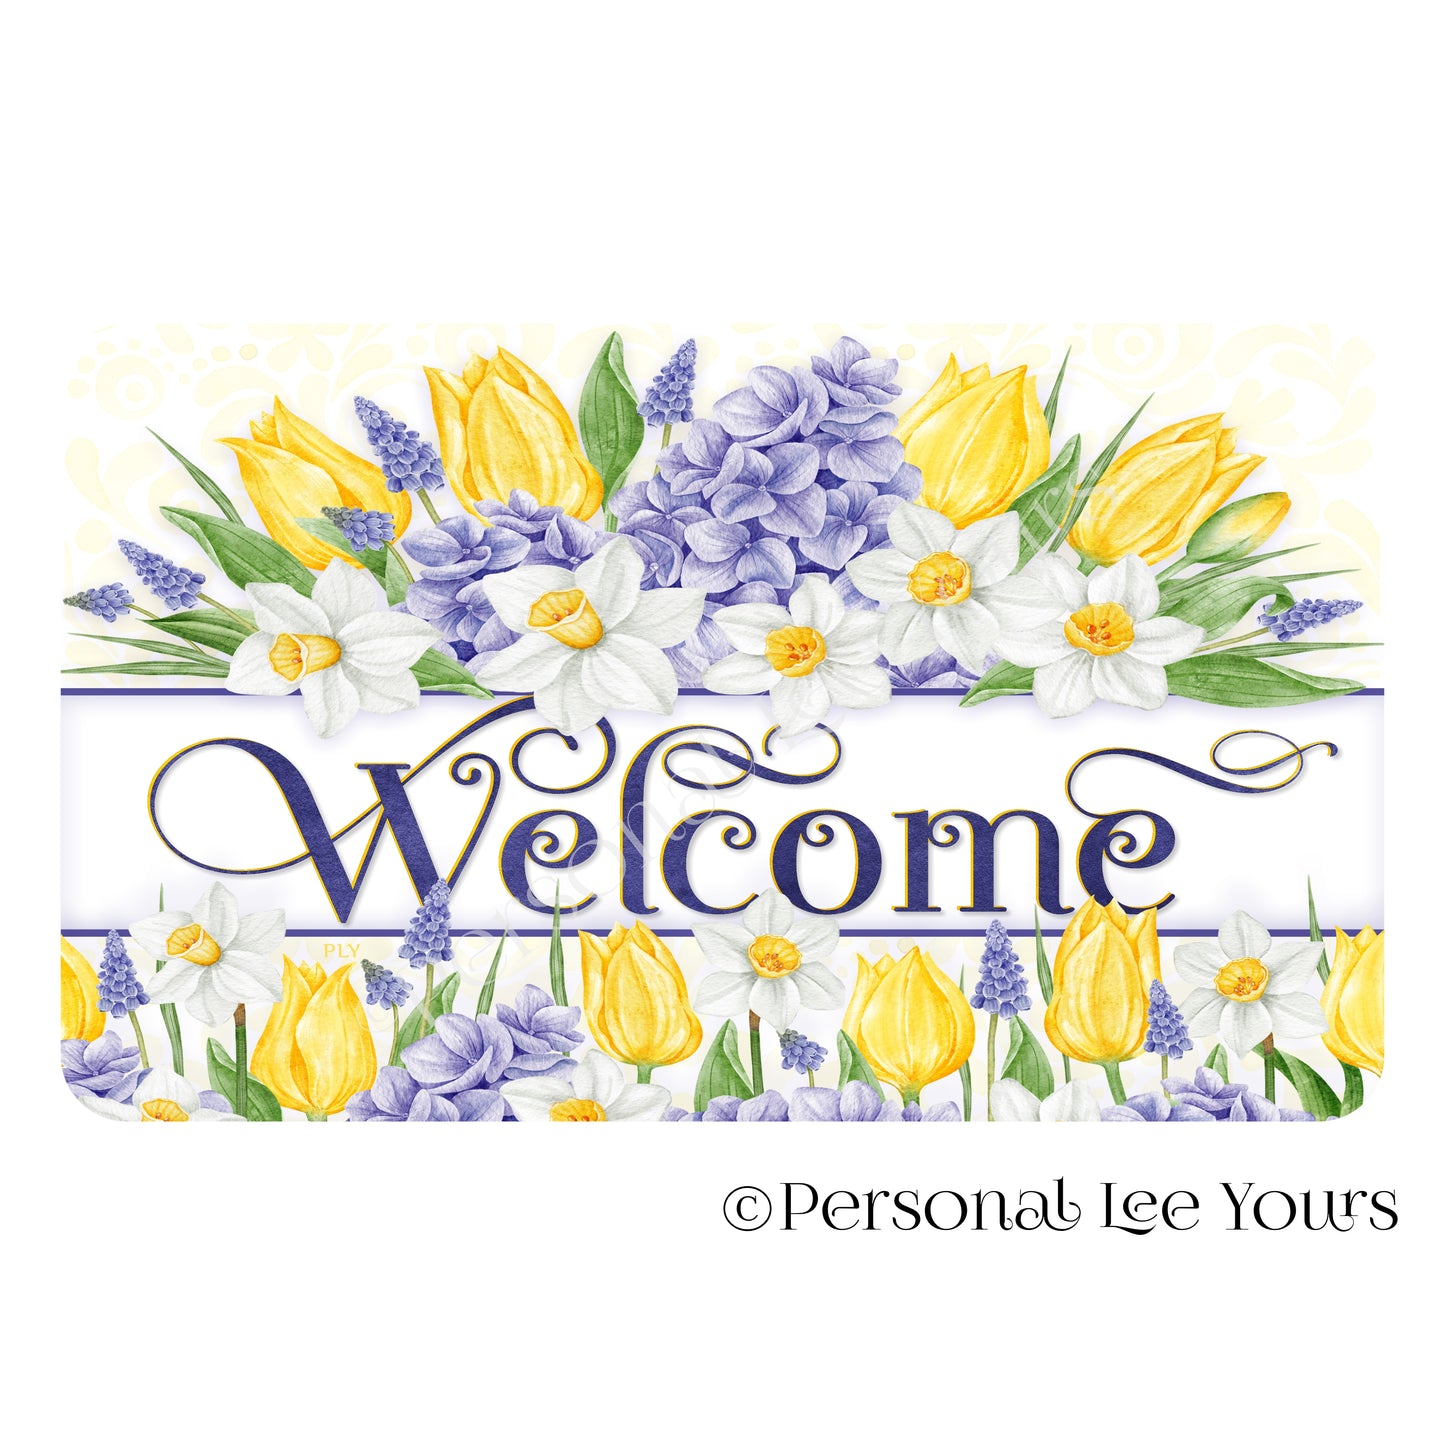 Wreath Sign * Yellow Tulips and Daffodils  * 4 Sizes * Horizontal * Lightweight Metal